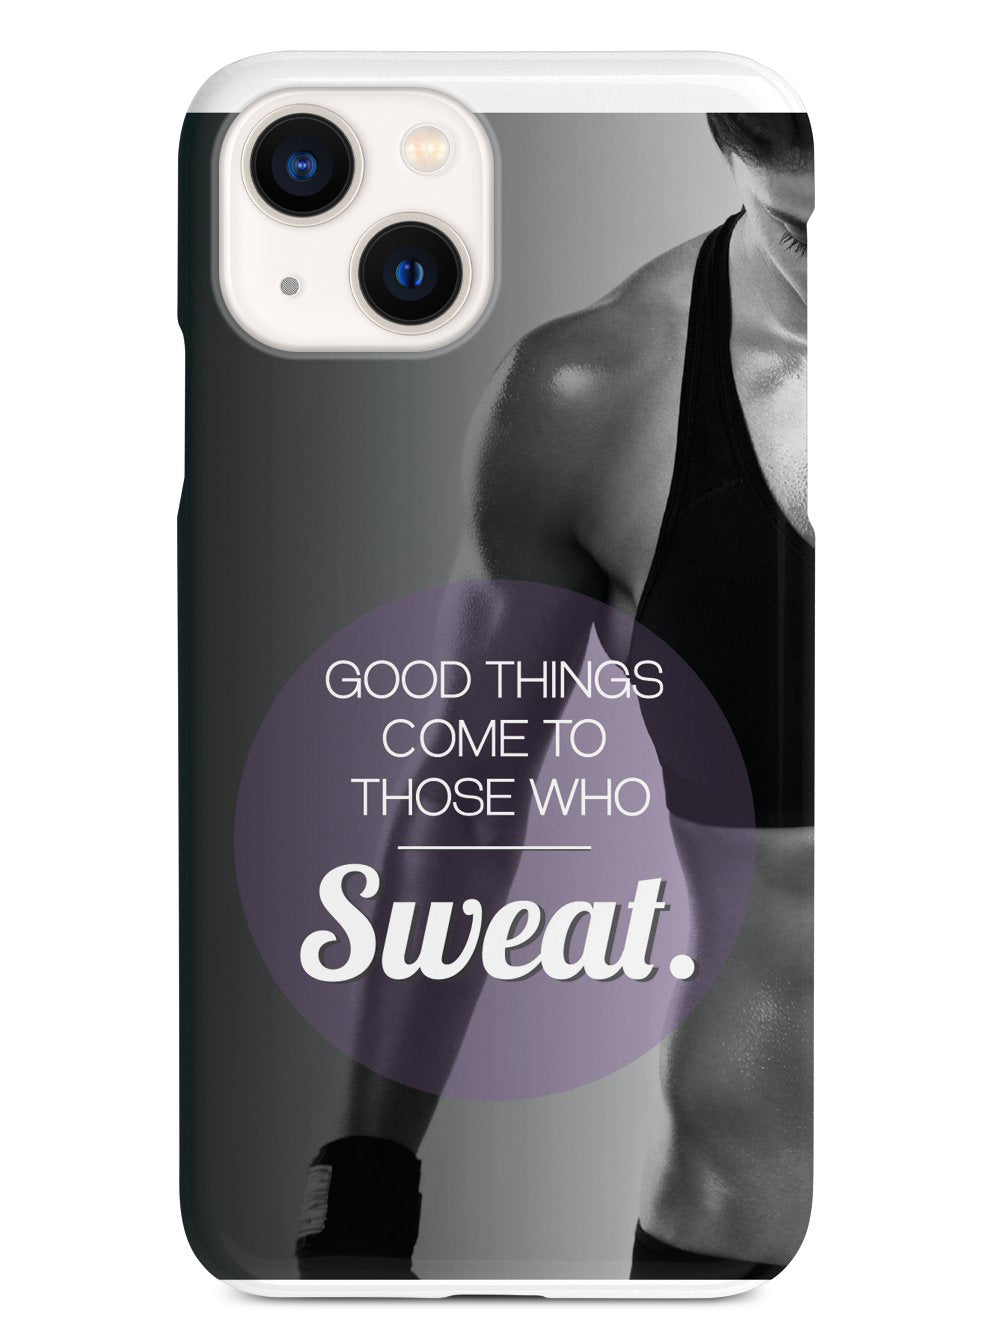 Those Who Sweat - Fitness Case